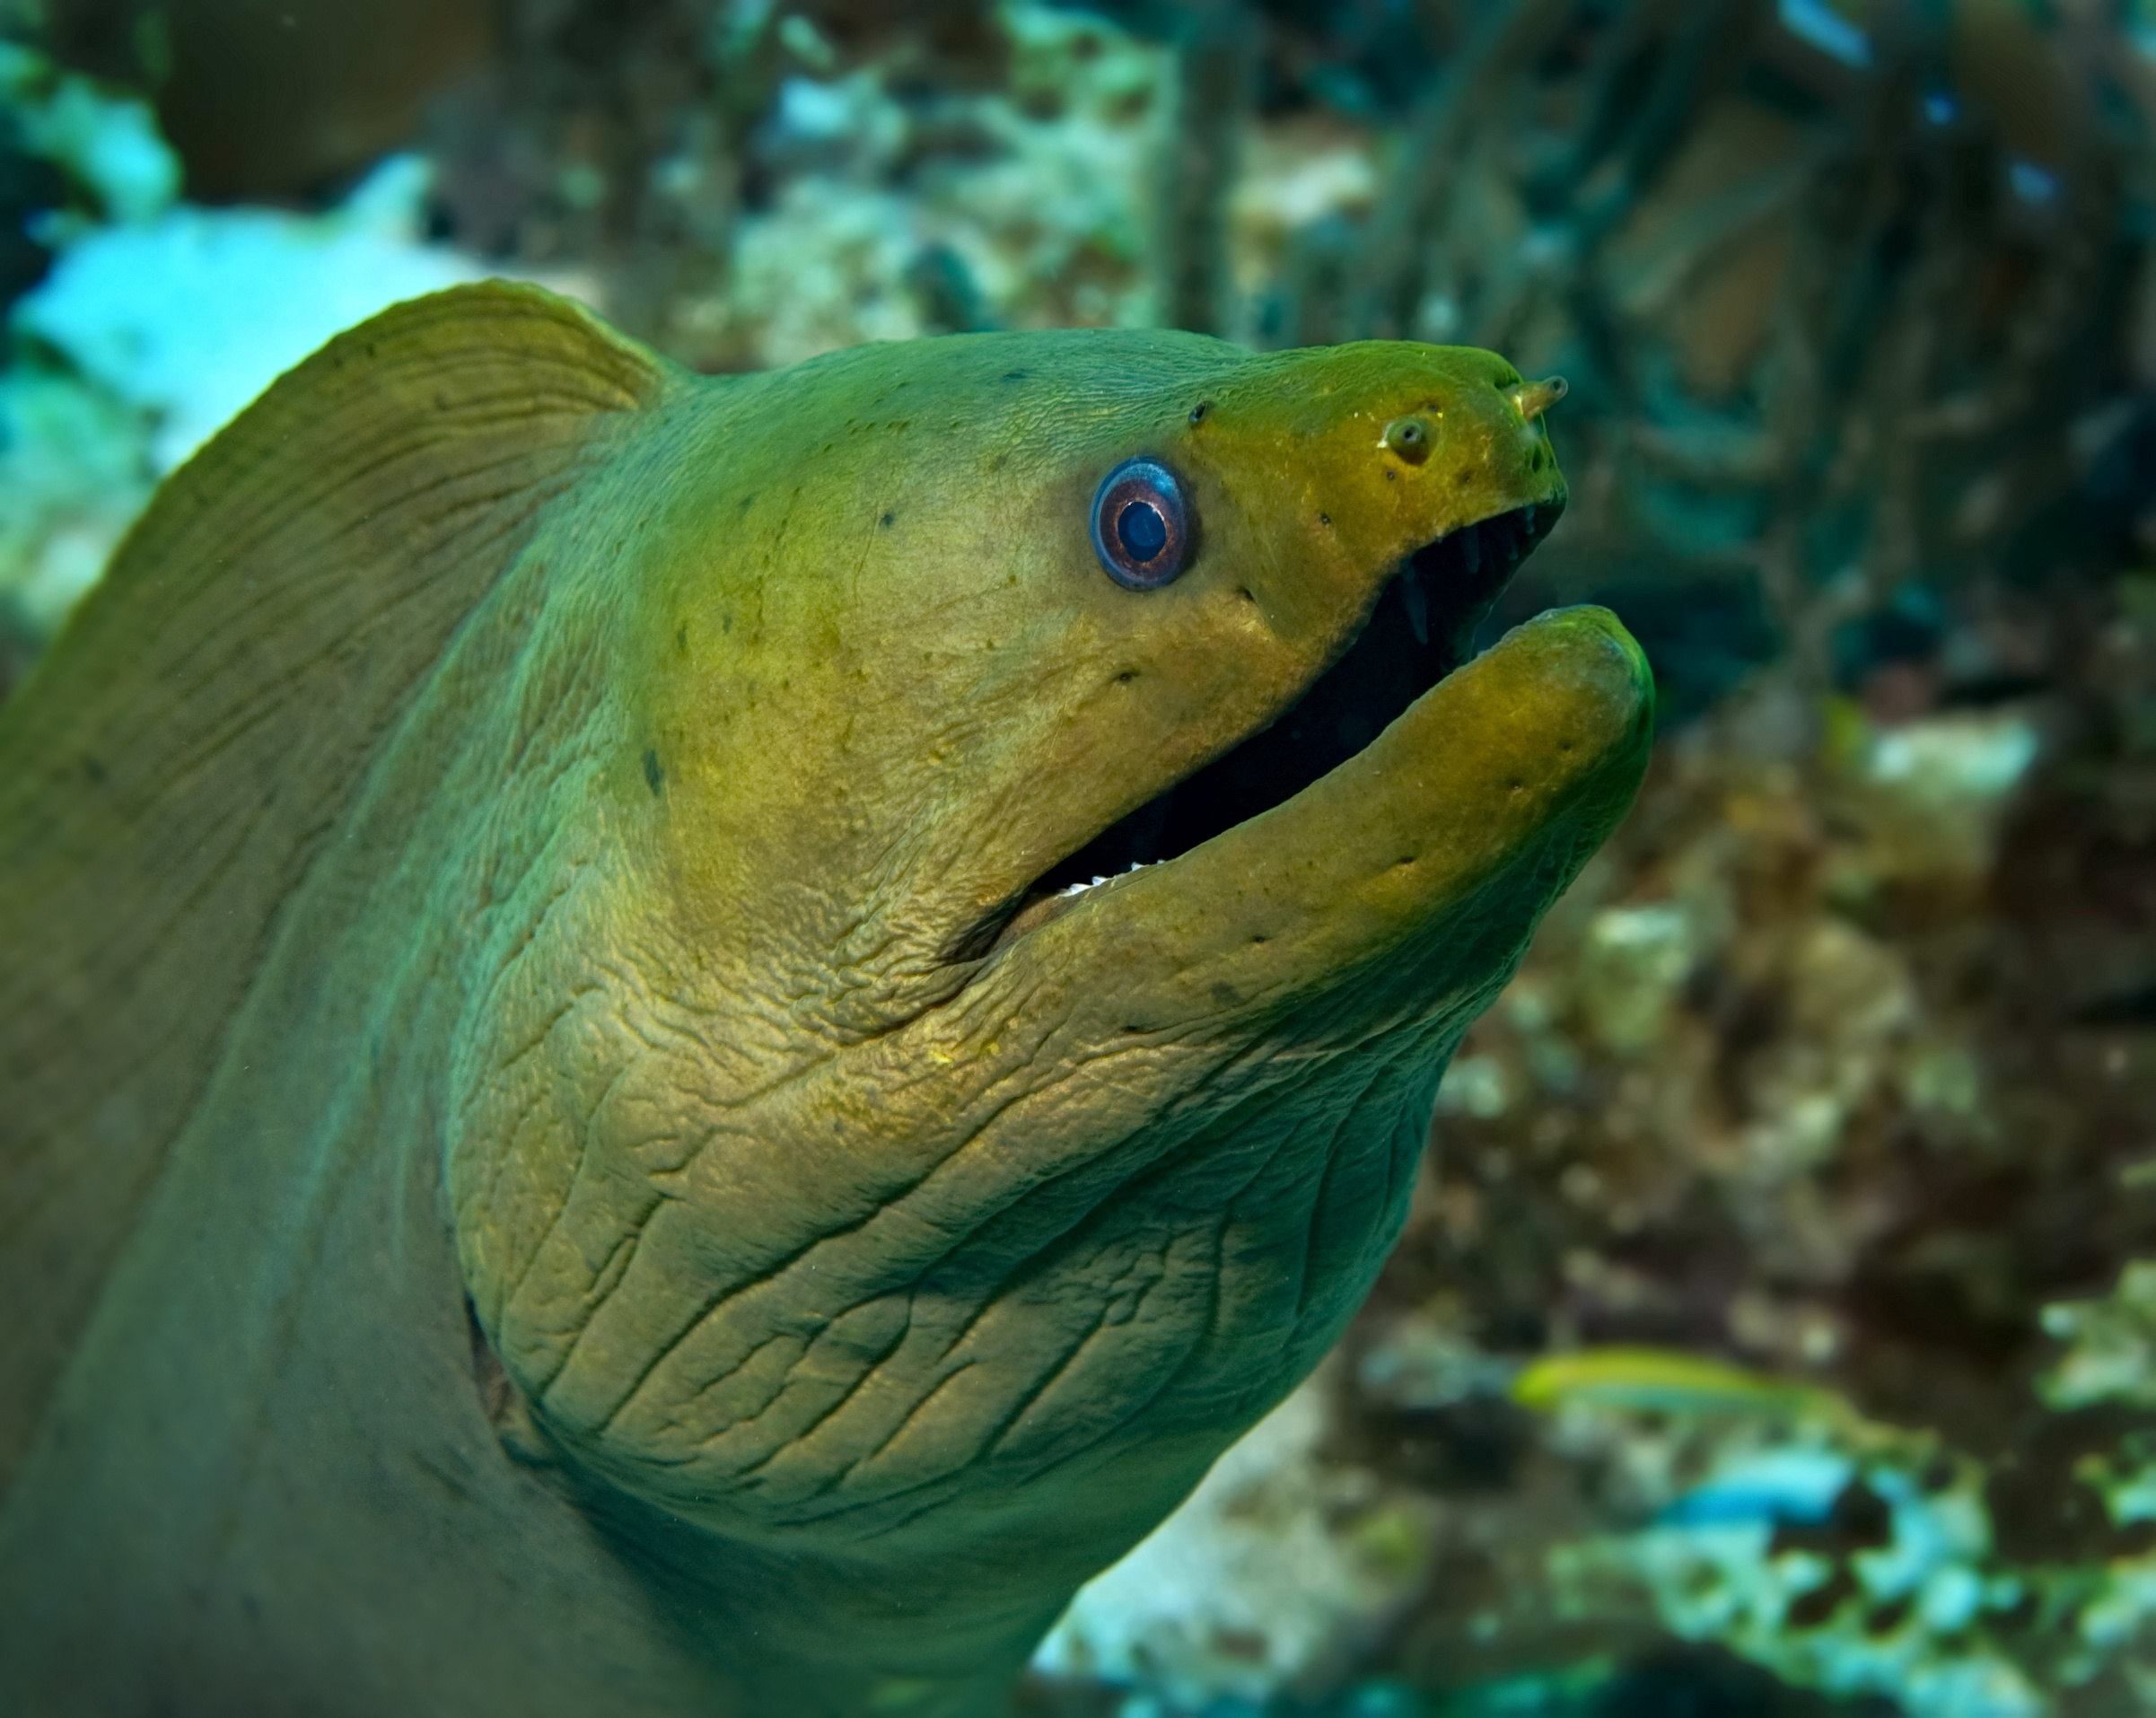 Green moray eel with its mouth open poses for diver photos at the Kennedy dive site in Saint Thomas, U.S. Virgin Islands